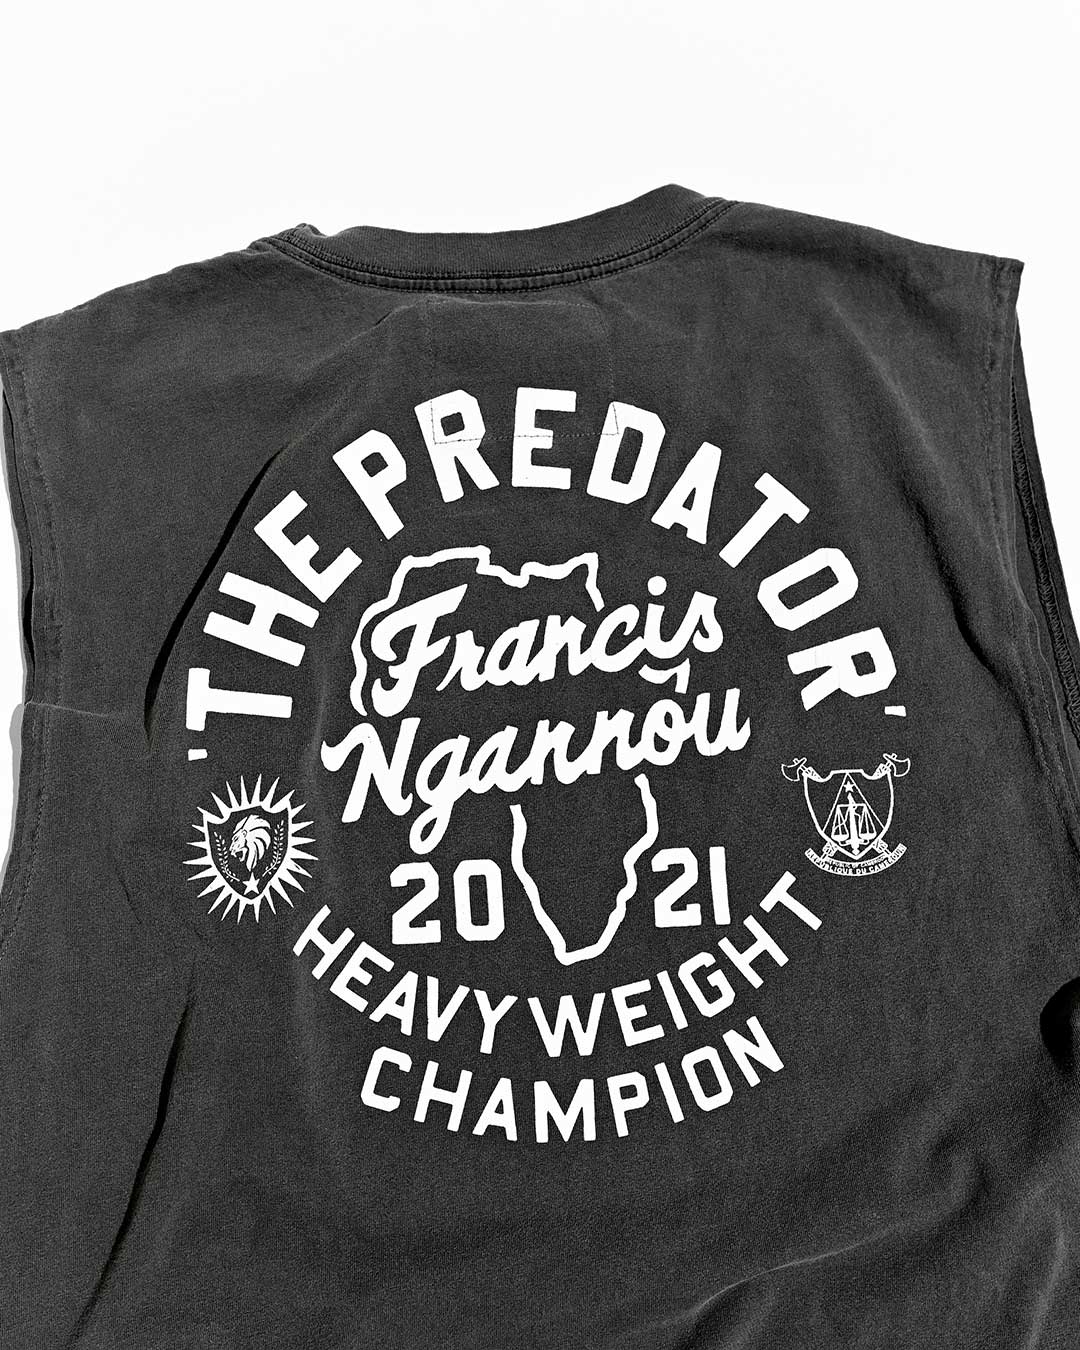 Ngannou &#39;The Predator&#39; Black Muscle Tee - Roots of Fight Canada